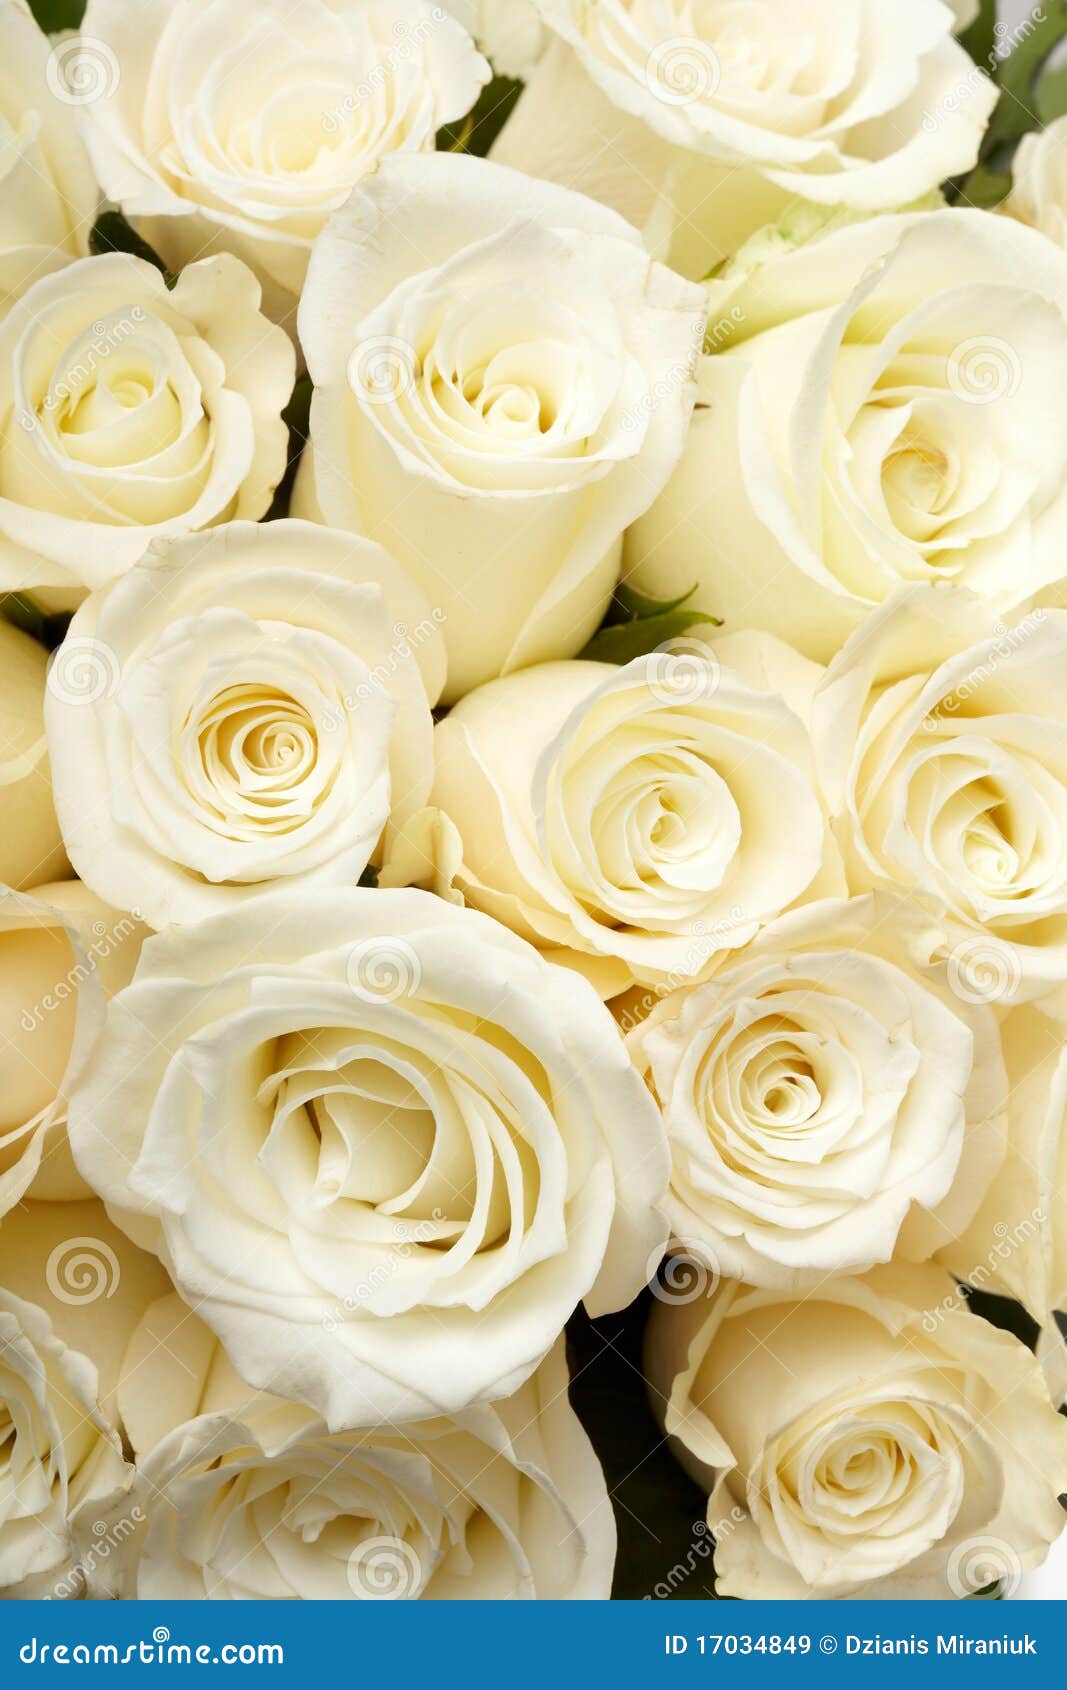 Beautiful Cream Roses Background, View From Above Stock Photo, Picture And  Royalty Free Image